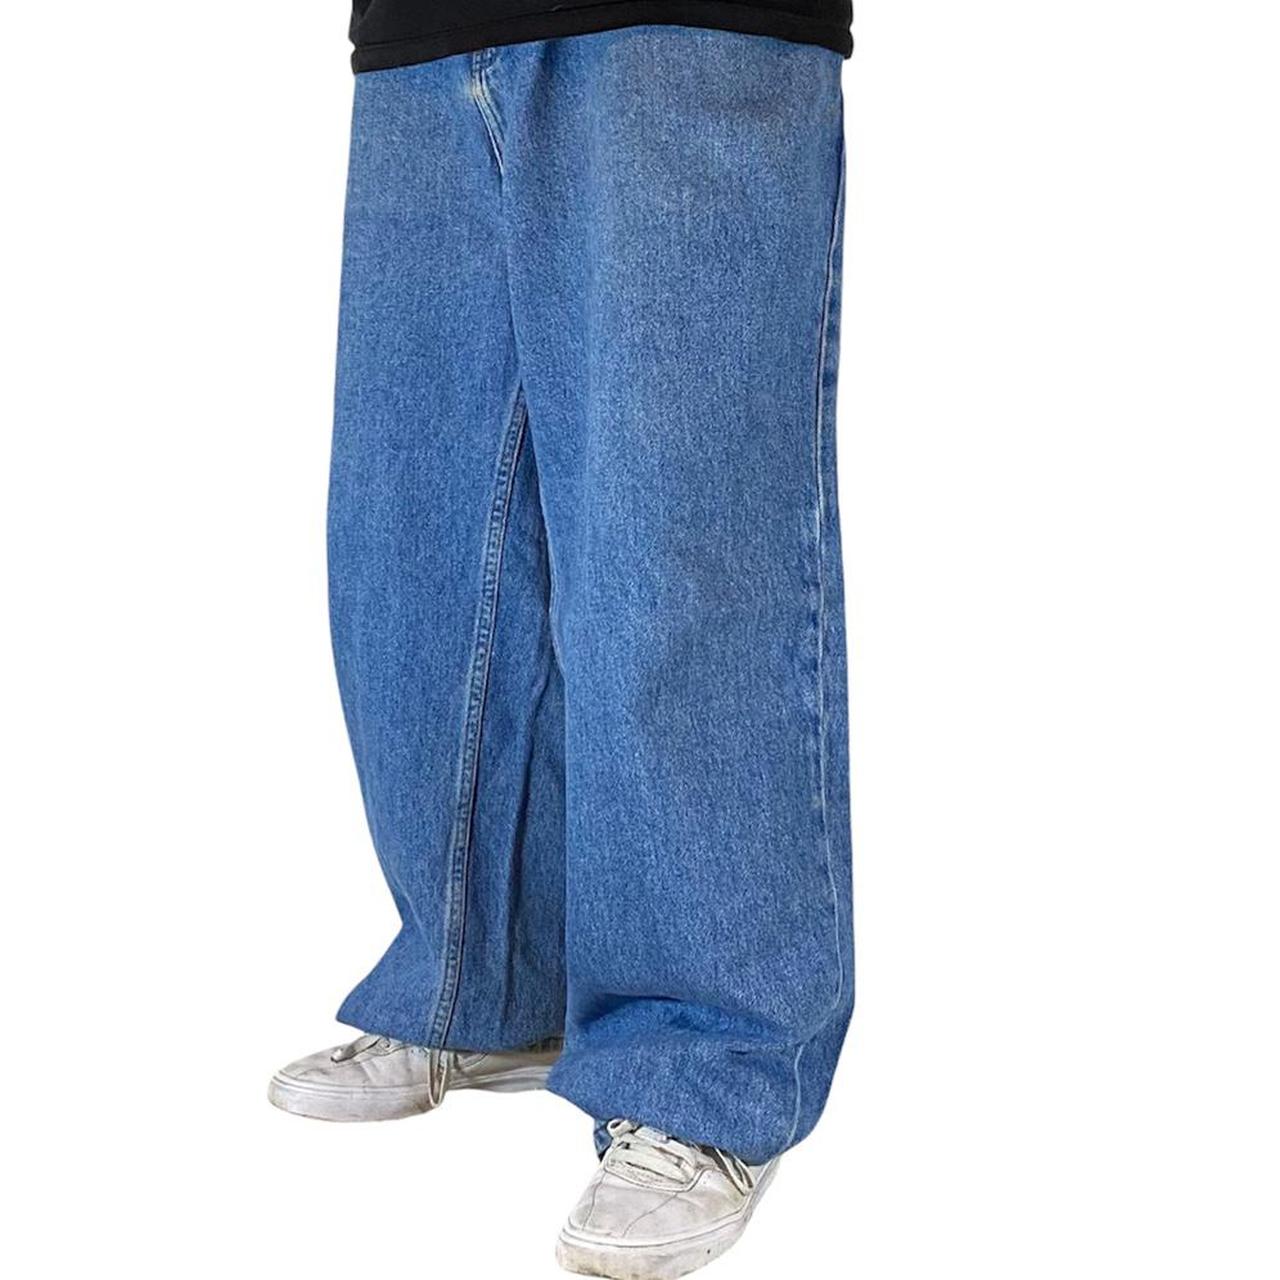 Product Image 1 - Anchor blue big baggy jeans